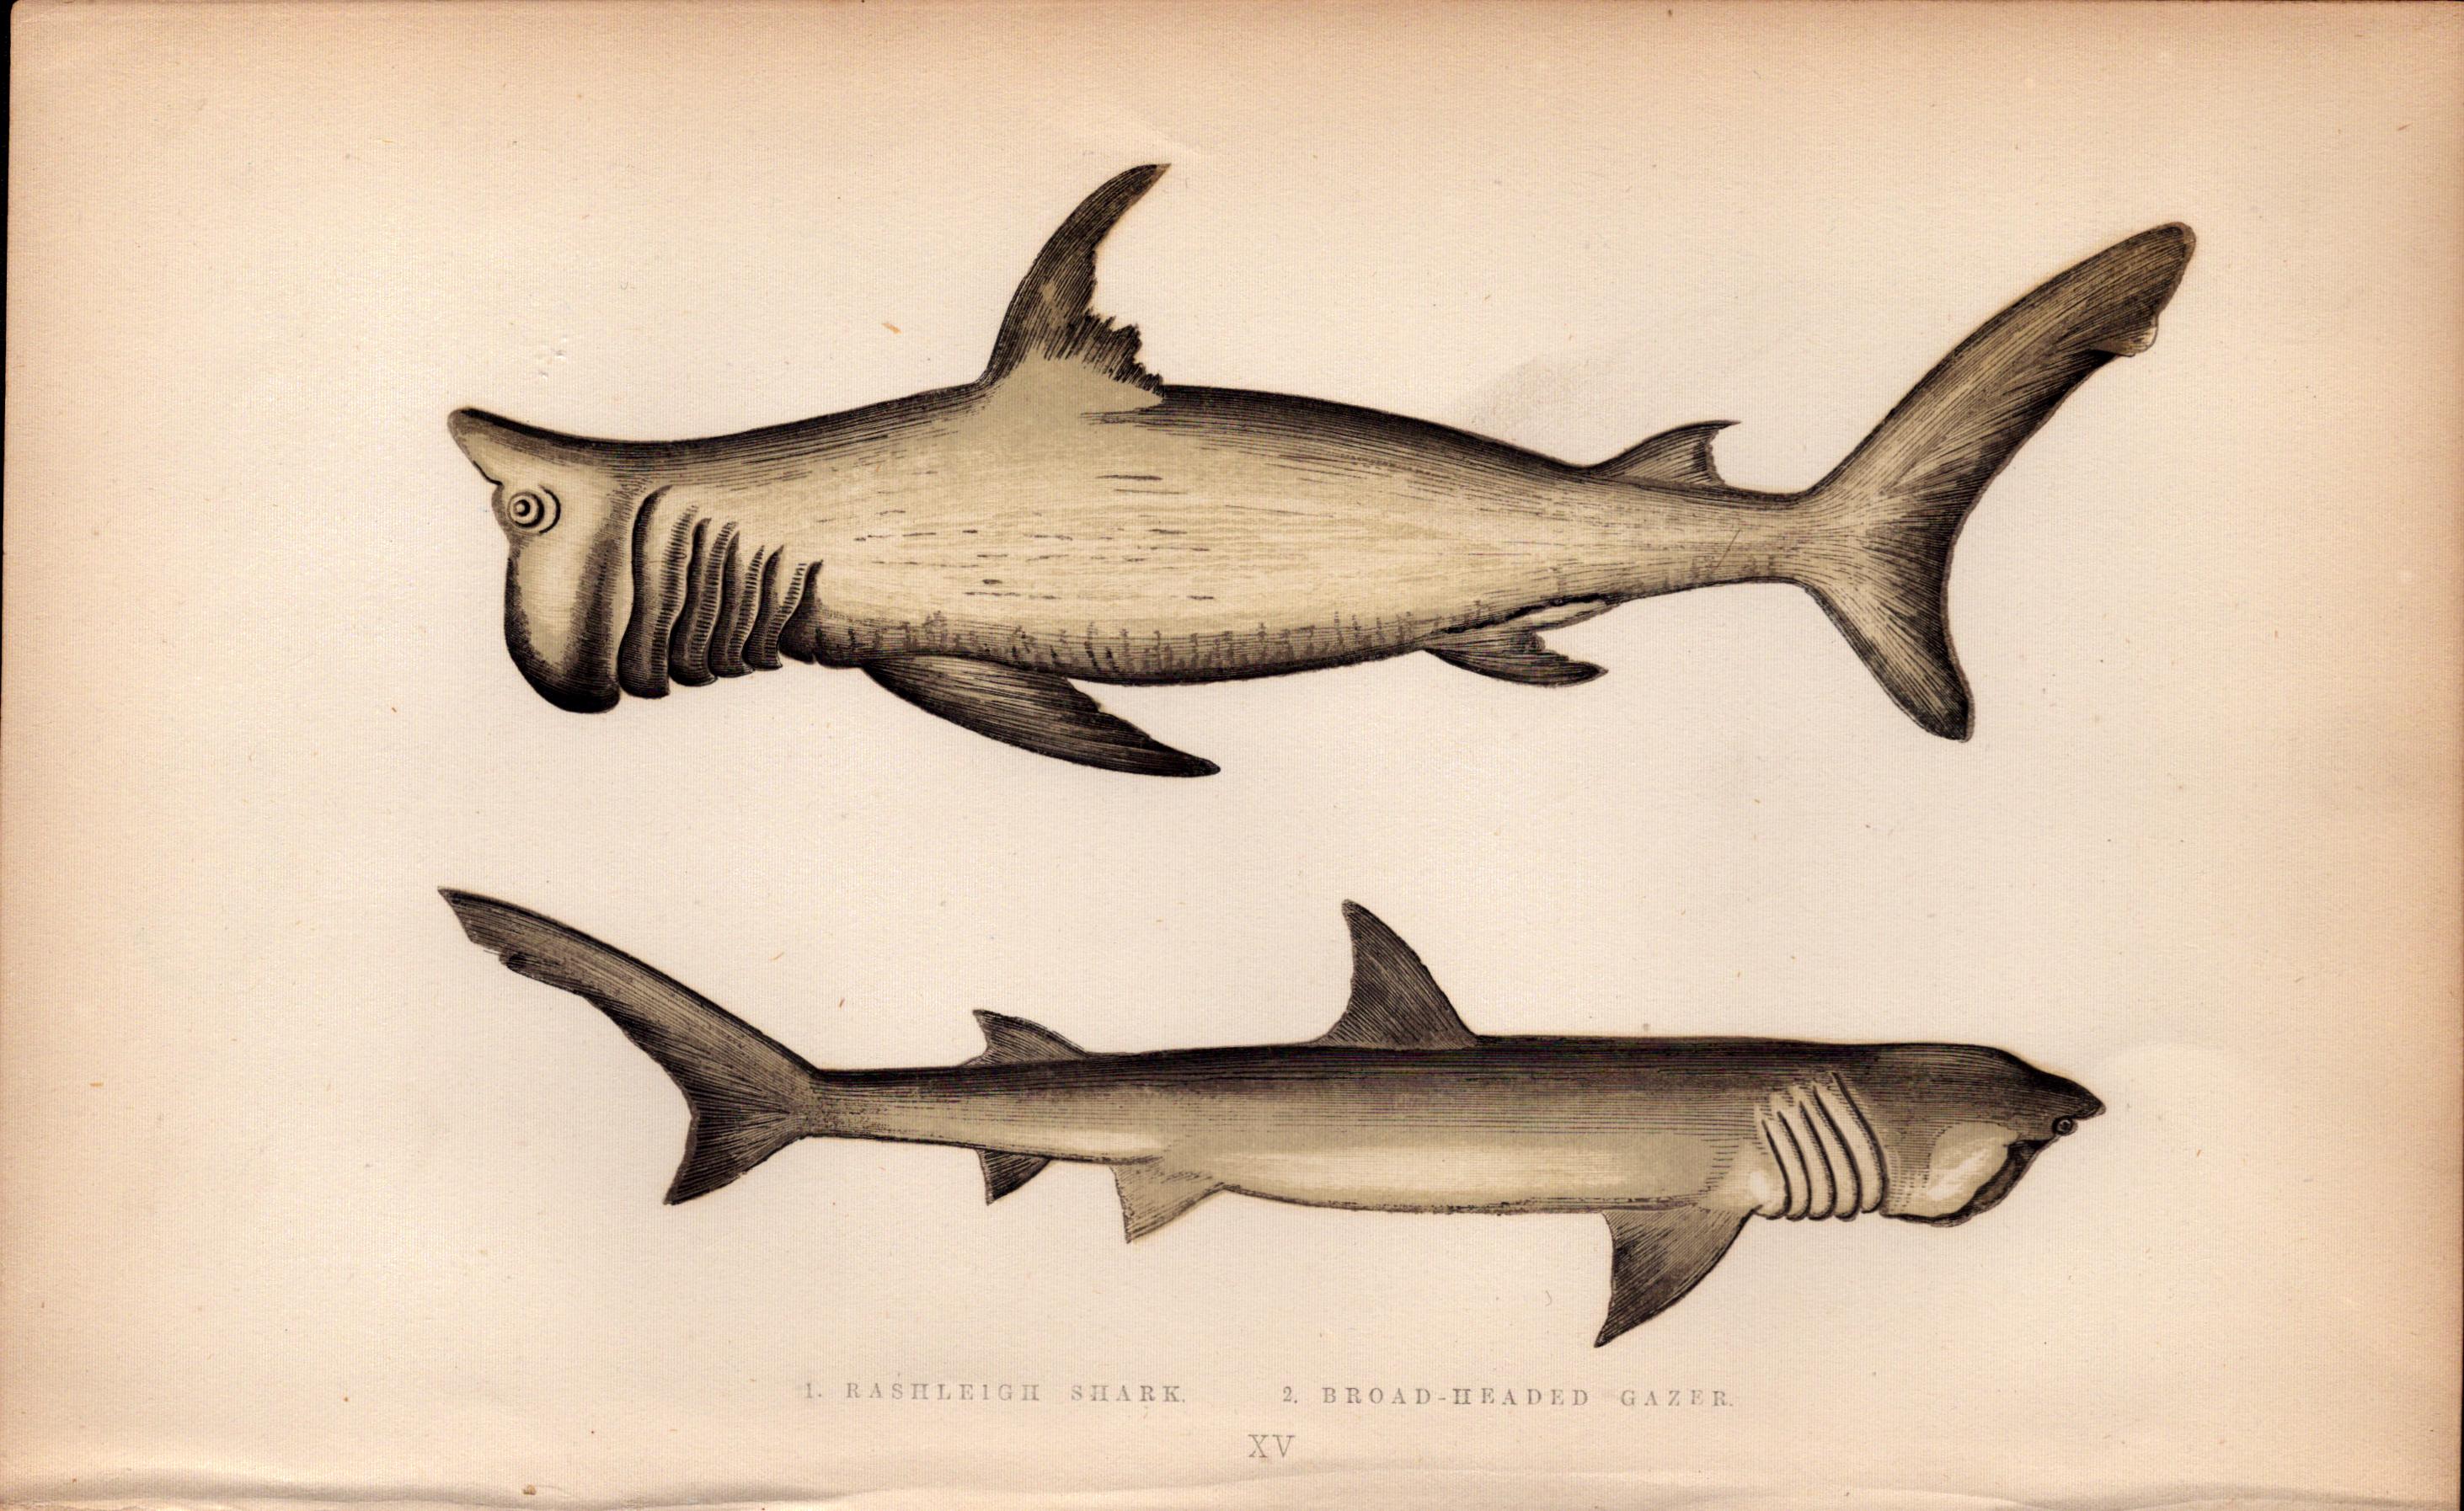 Broad Headed Gazer Shark 1869 Antique Johnathan Couch Coloured Engraving.